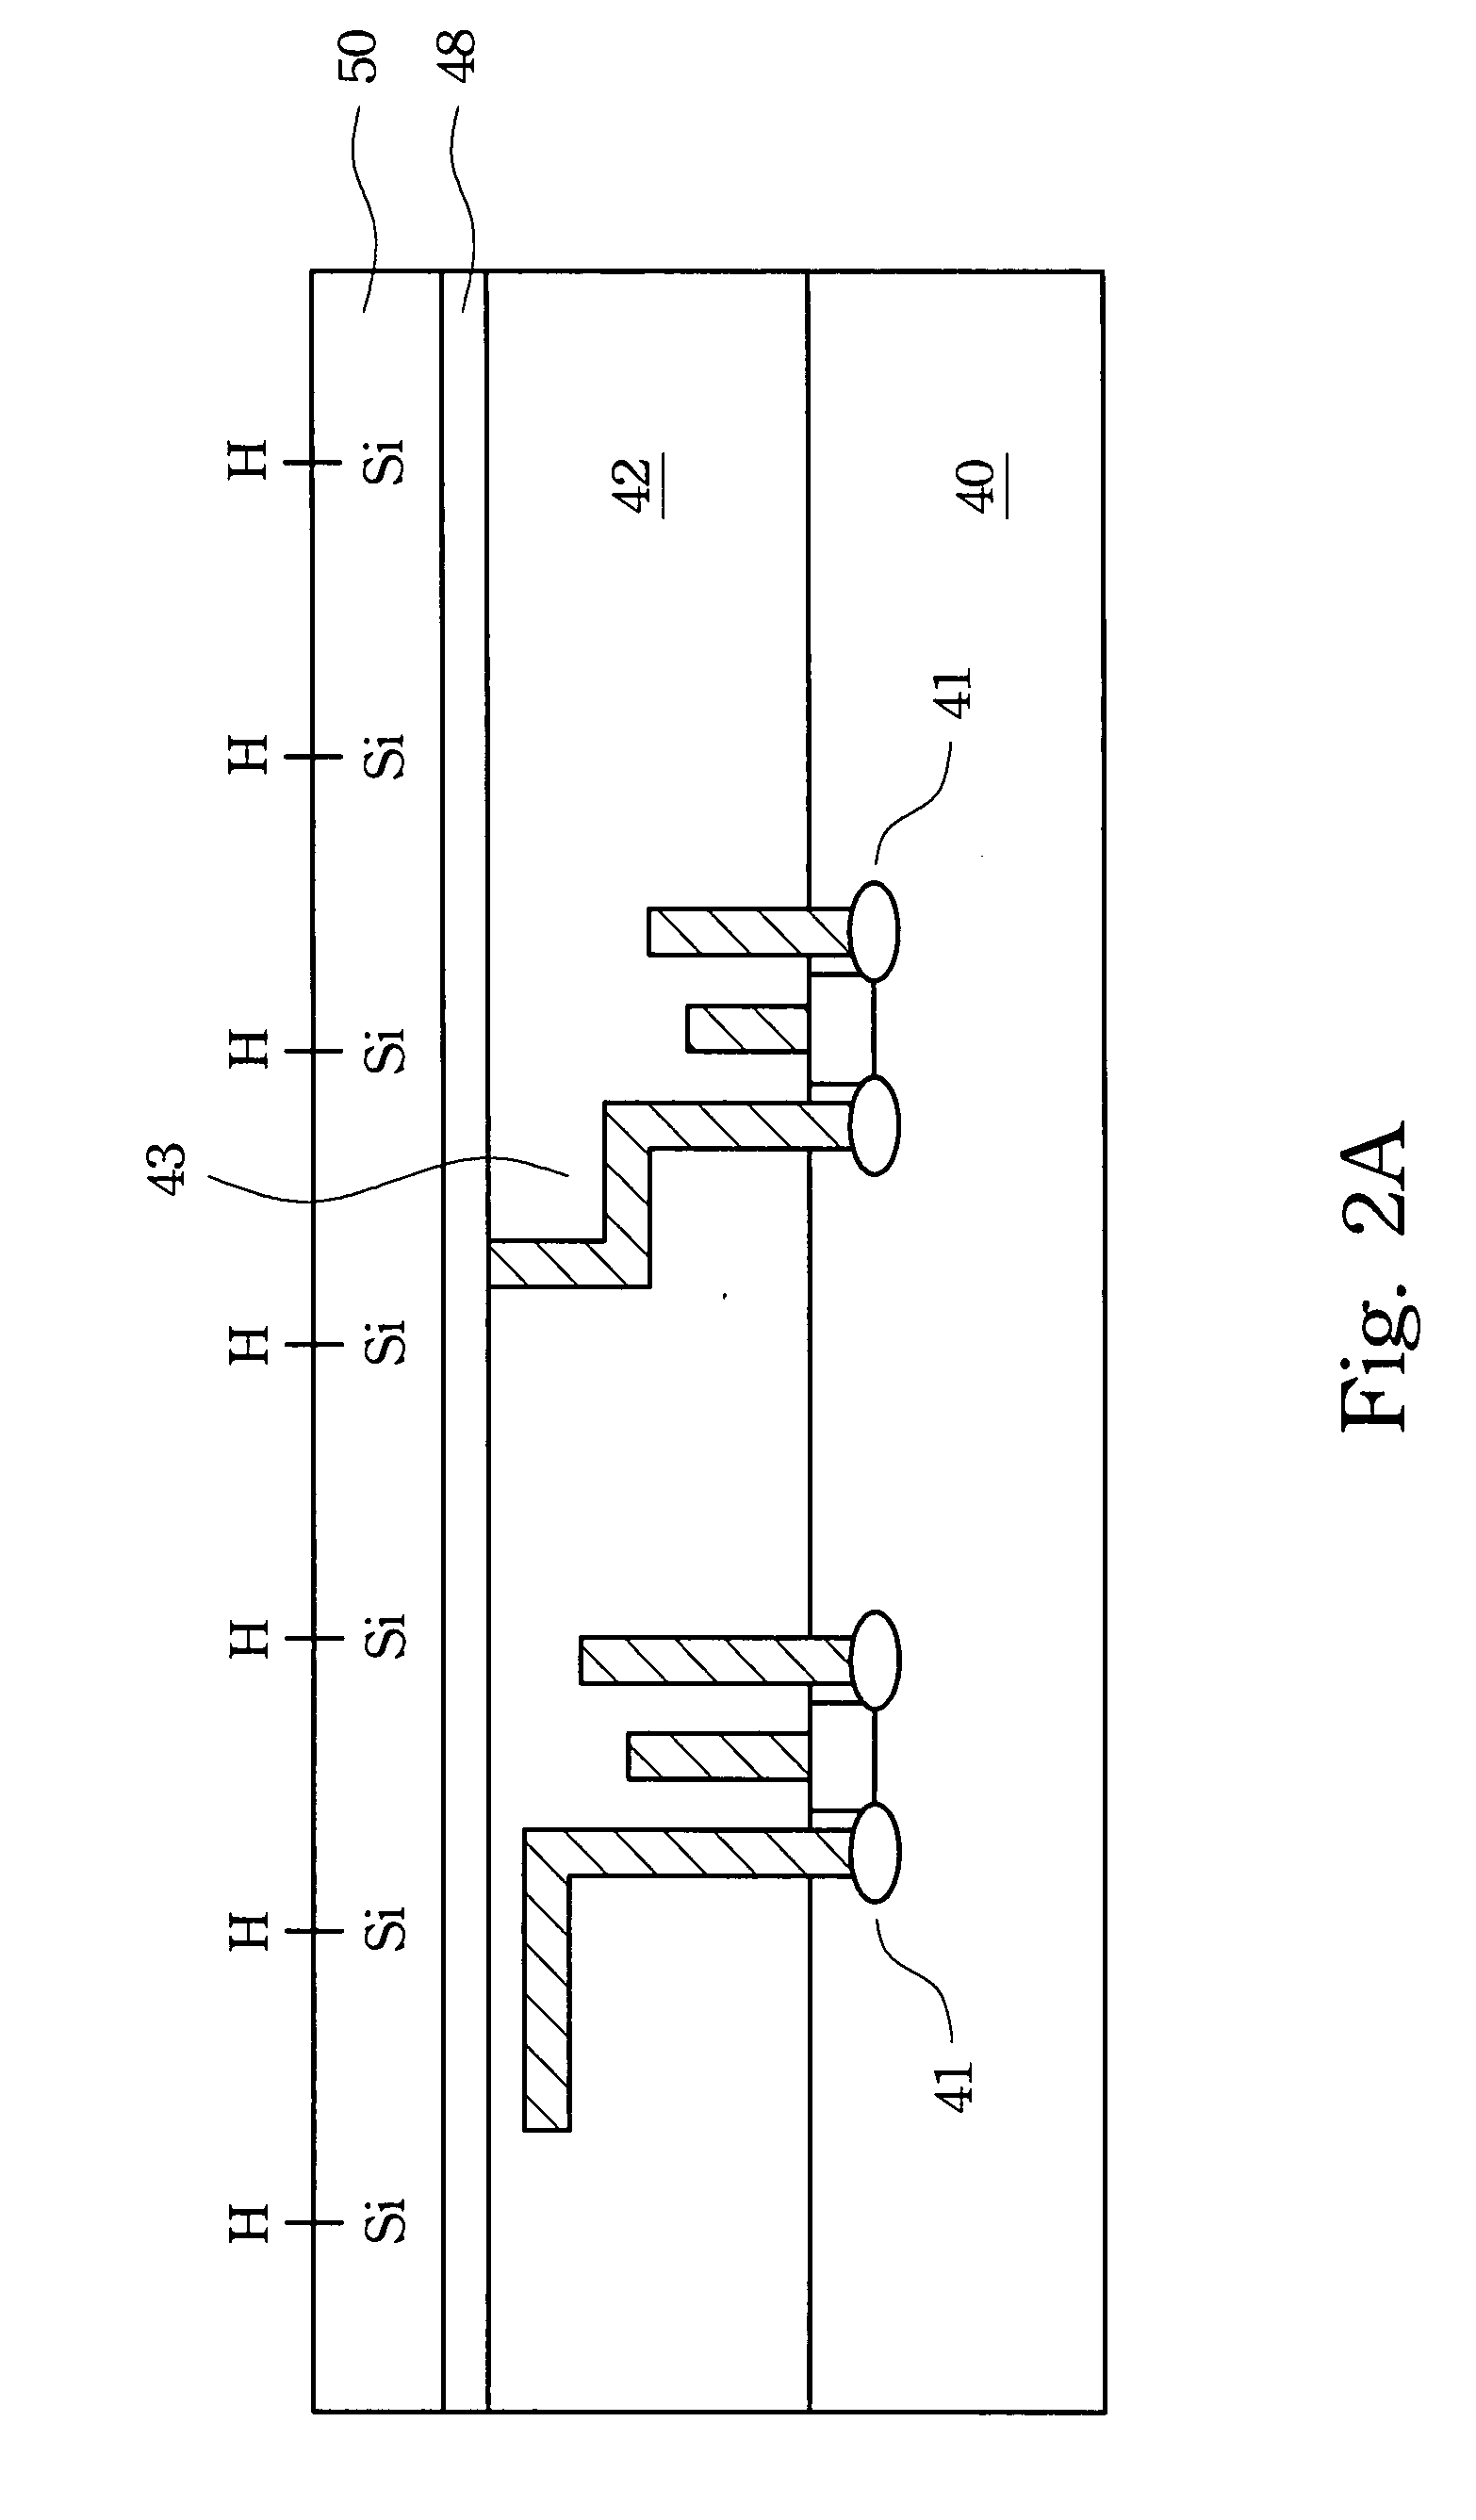 By-product removal for wafer bonding process